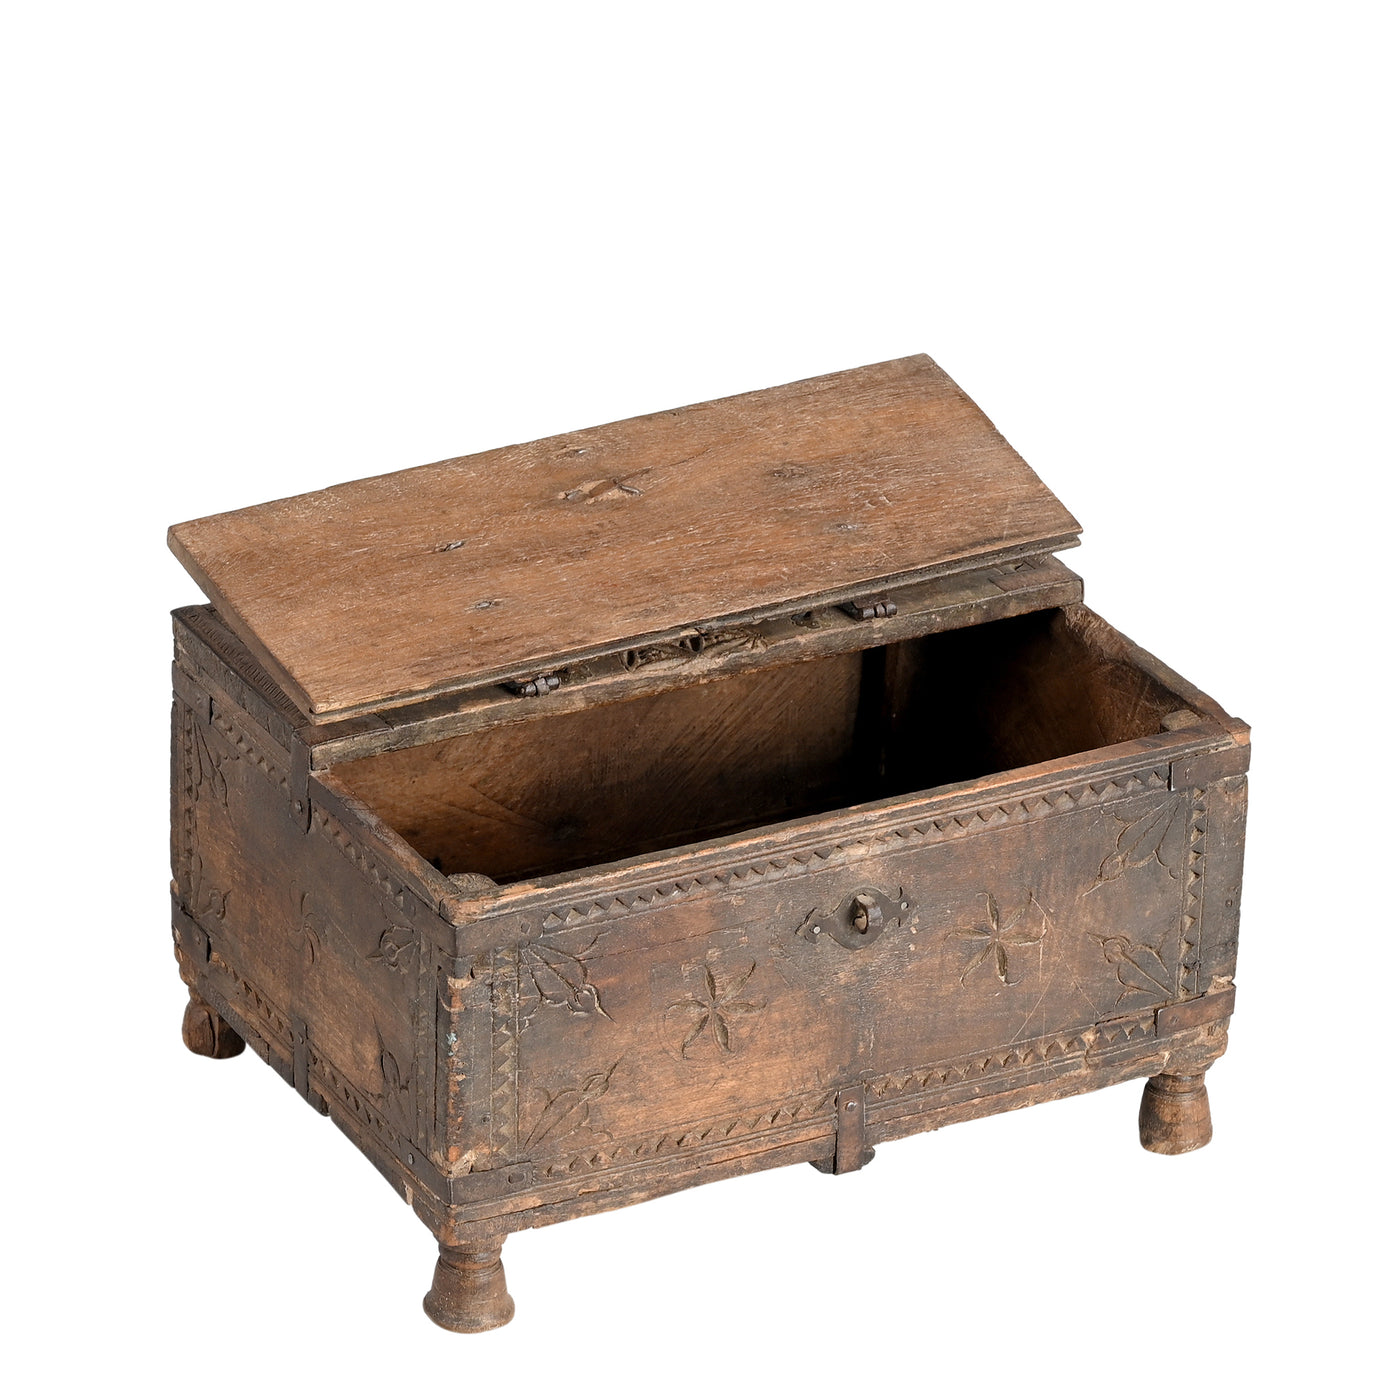 Peti - Wooden dowry chest n ° 16